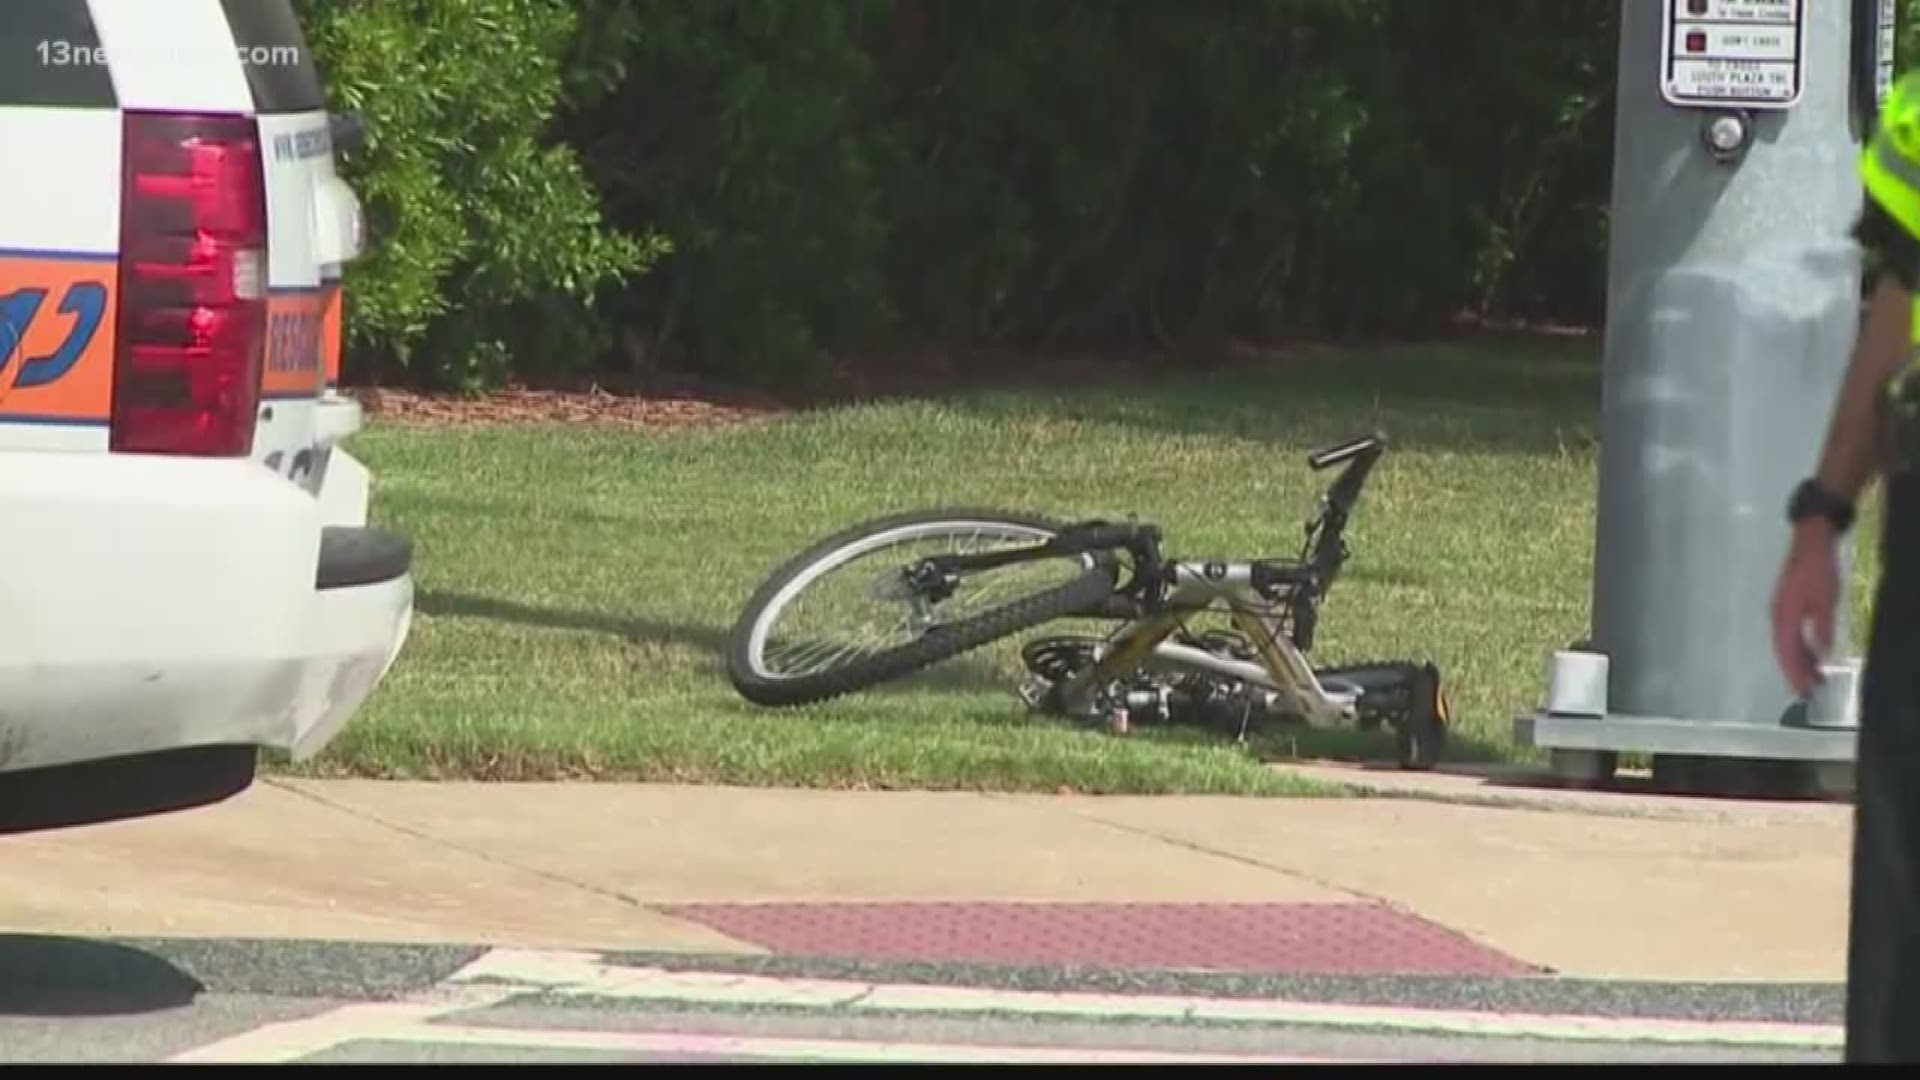 Doctors are treating a child, who was hit by a car while riding a bike.